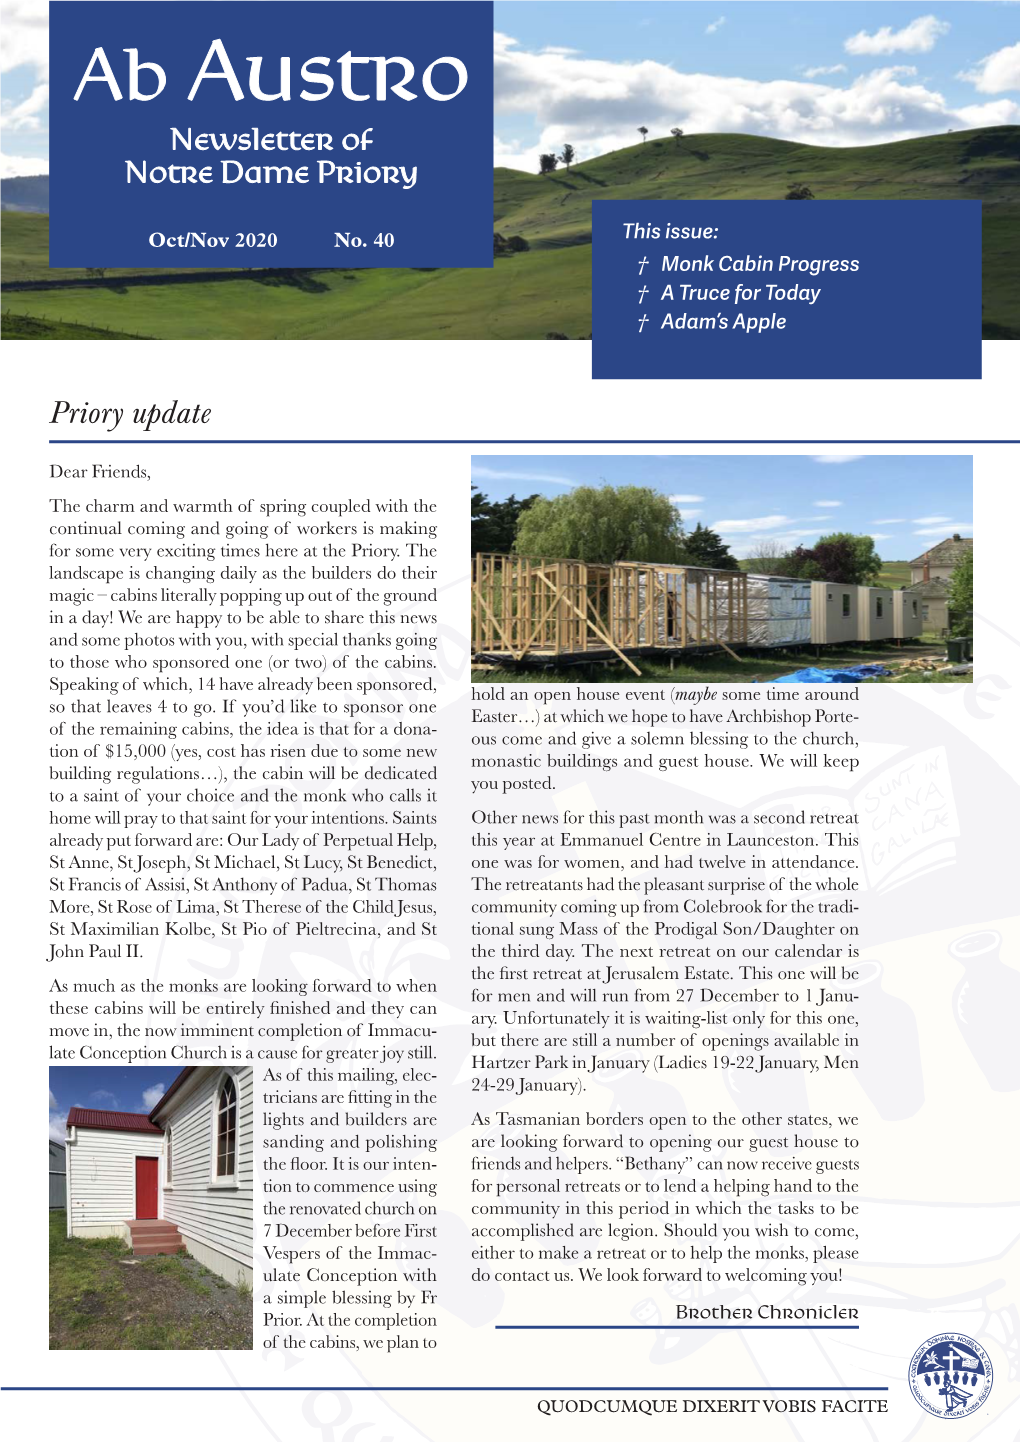 Ab Austro Newsletter of Notre Dame Priory